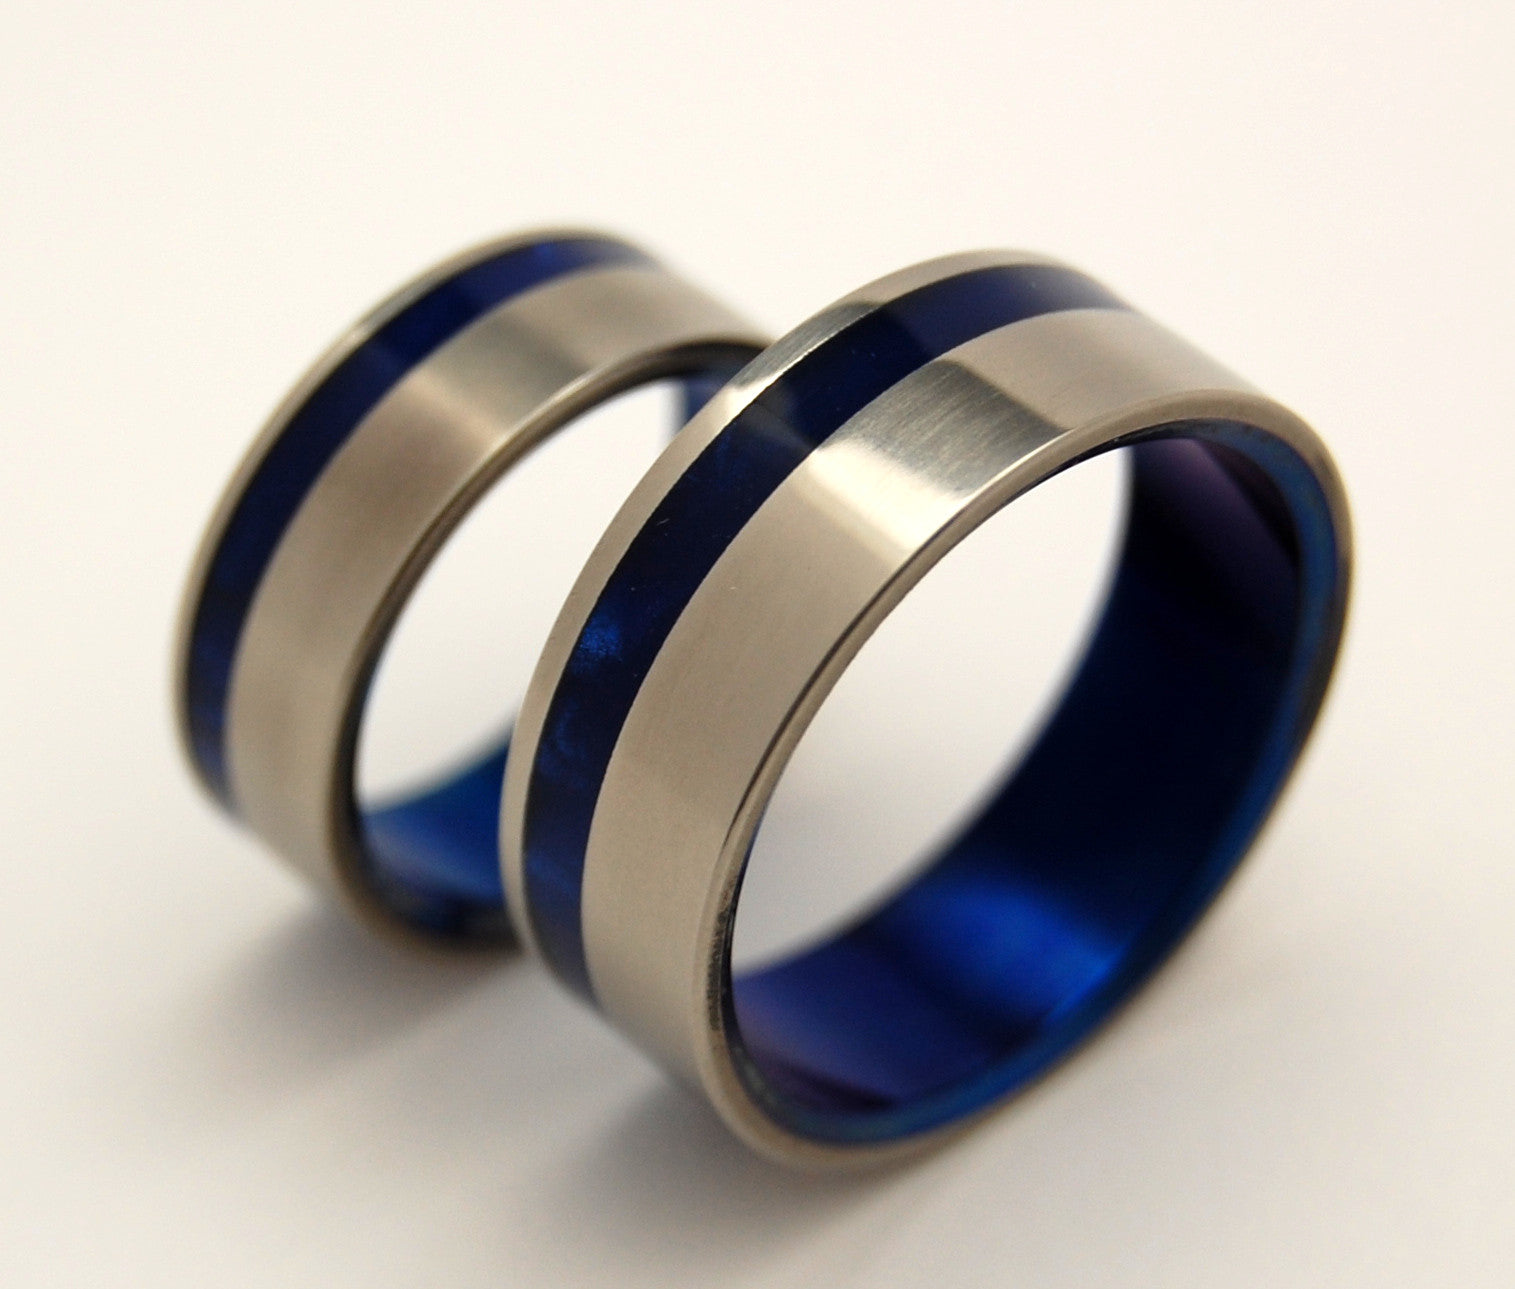 TO THE WINDS RESIGN | Blue Marbled Resin & Titanium - Unique Wedding Rings - Wedding Rings Set - Minter and Richter Designs